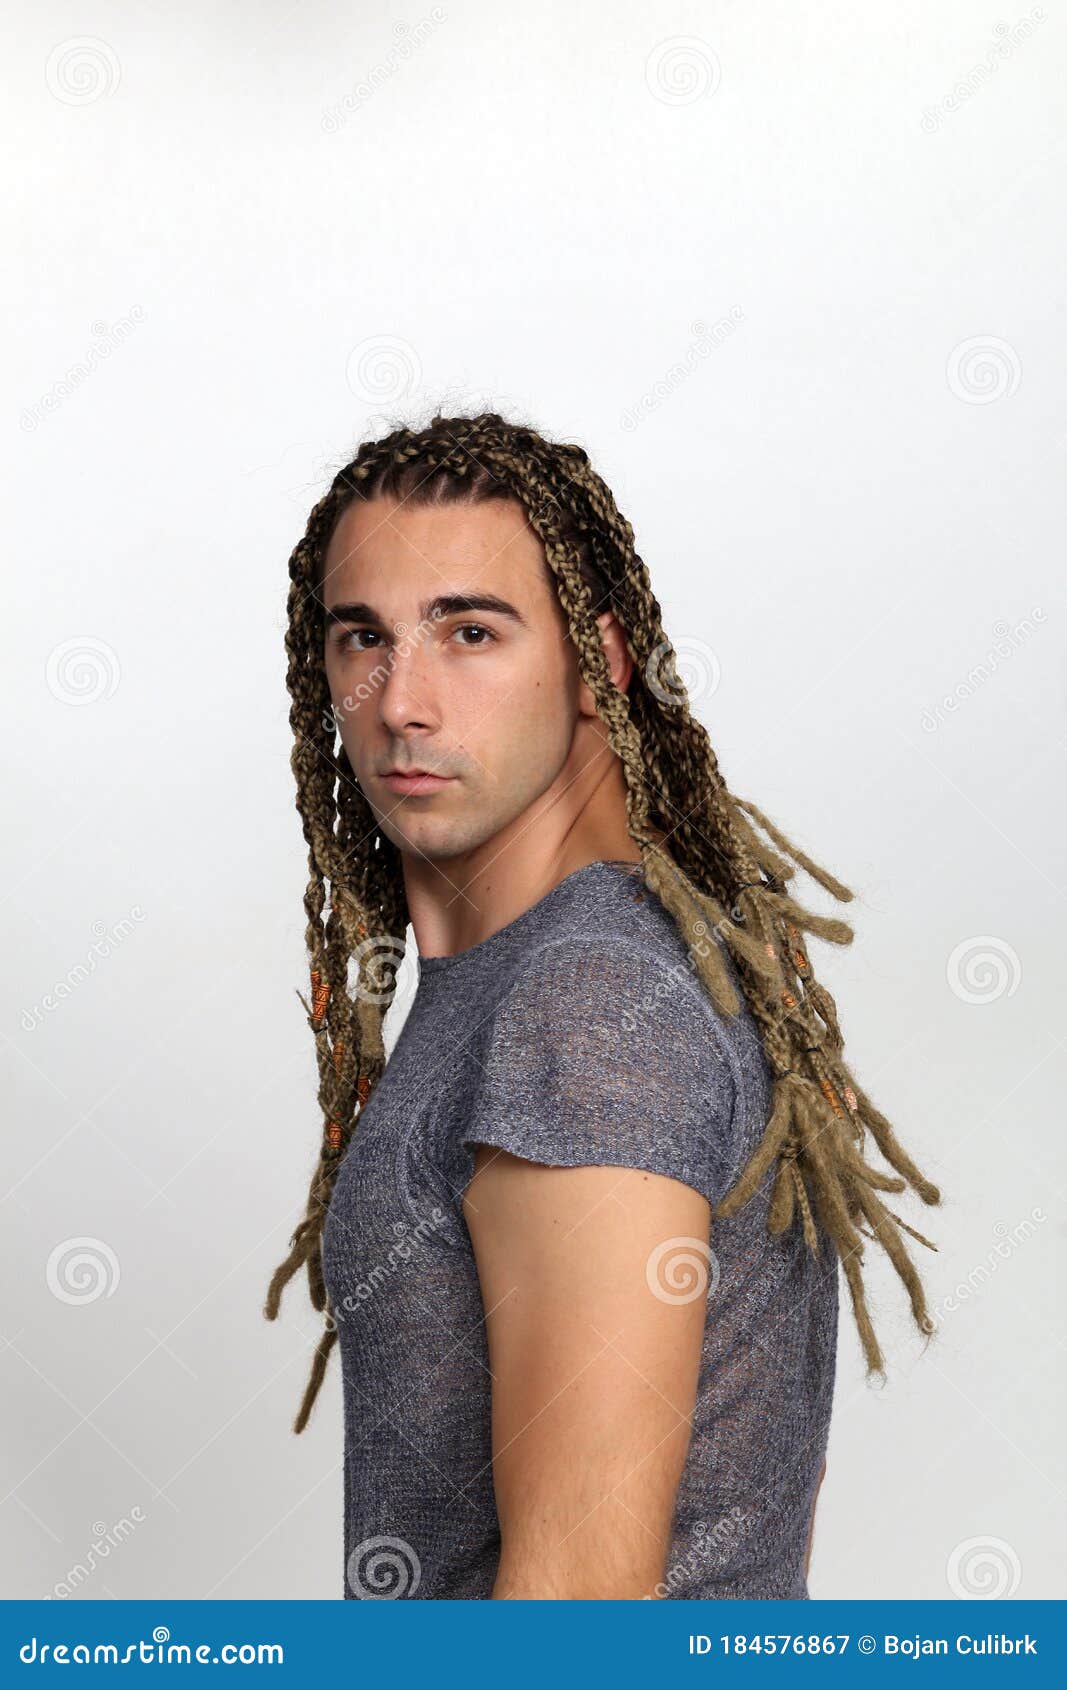 Attractive Blonde Male Model with Combination of Braids and Dreadlocks  Posing in Studio on Isolated Background. Stock Image - Image of hairstyle,  casual: 184576867